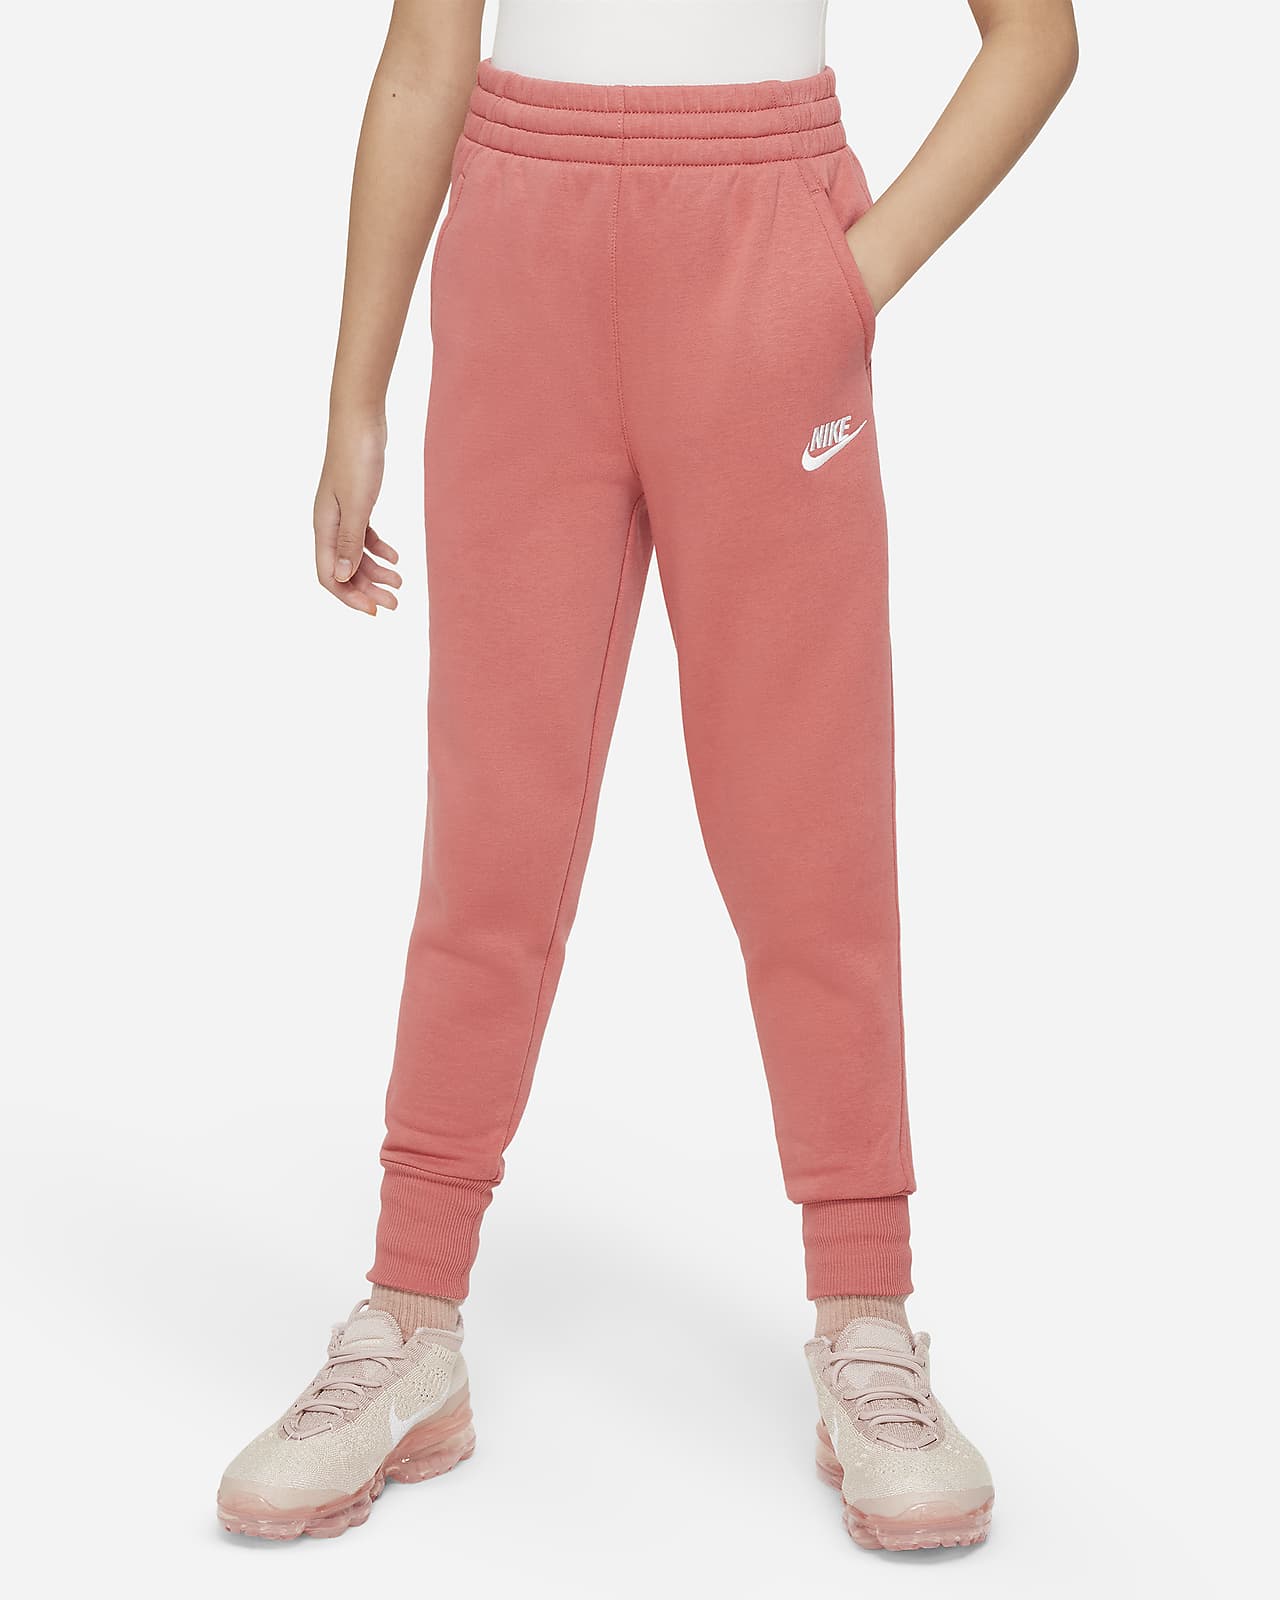 Nike Sportswear Futura Air Jumpsuit Womens Active Tracksuits Size